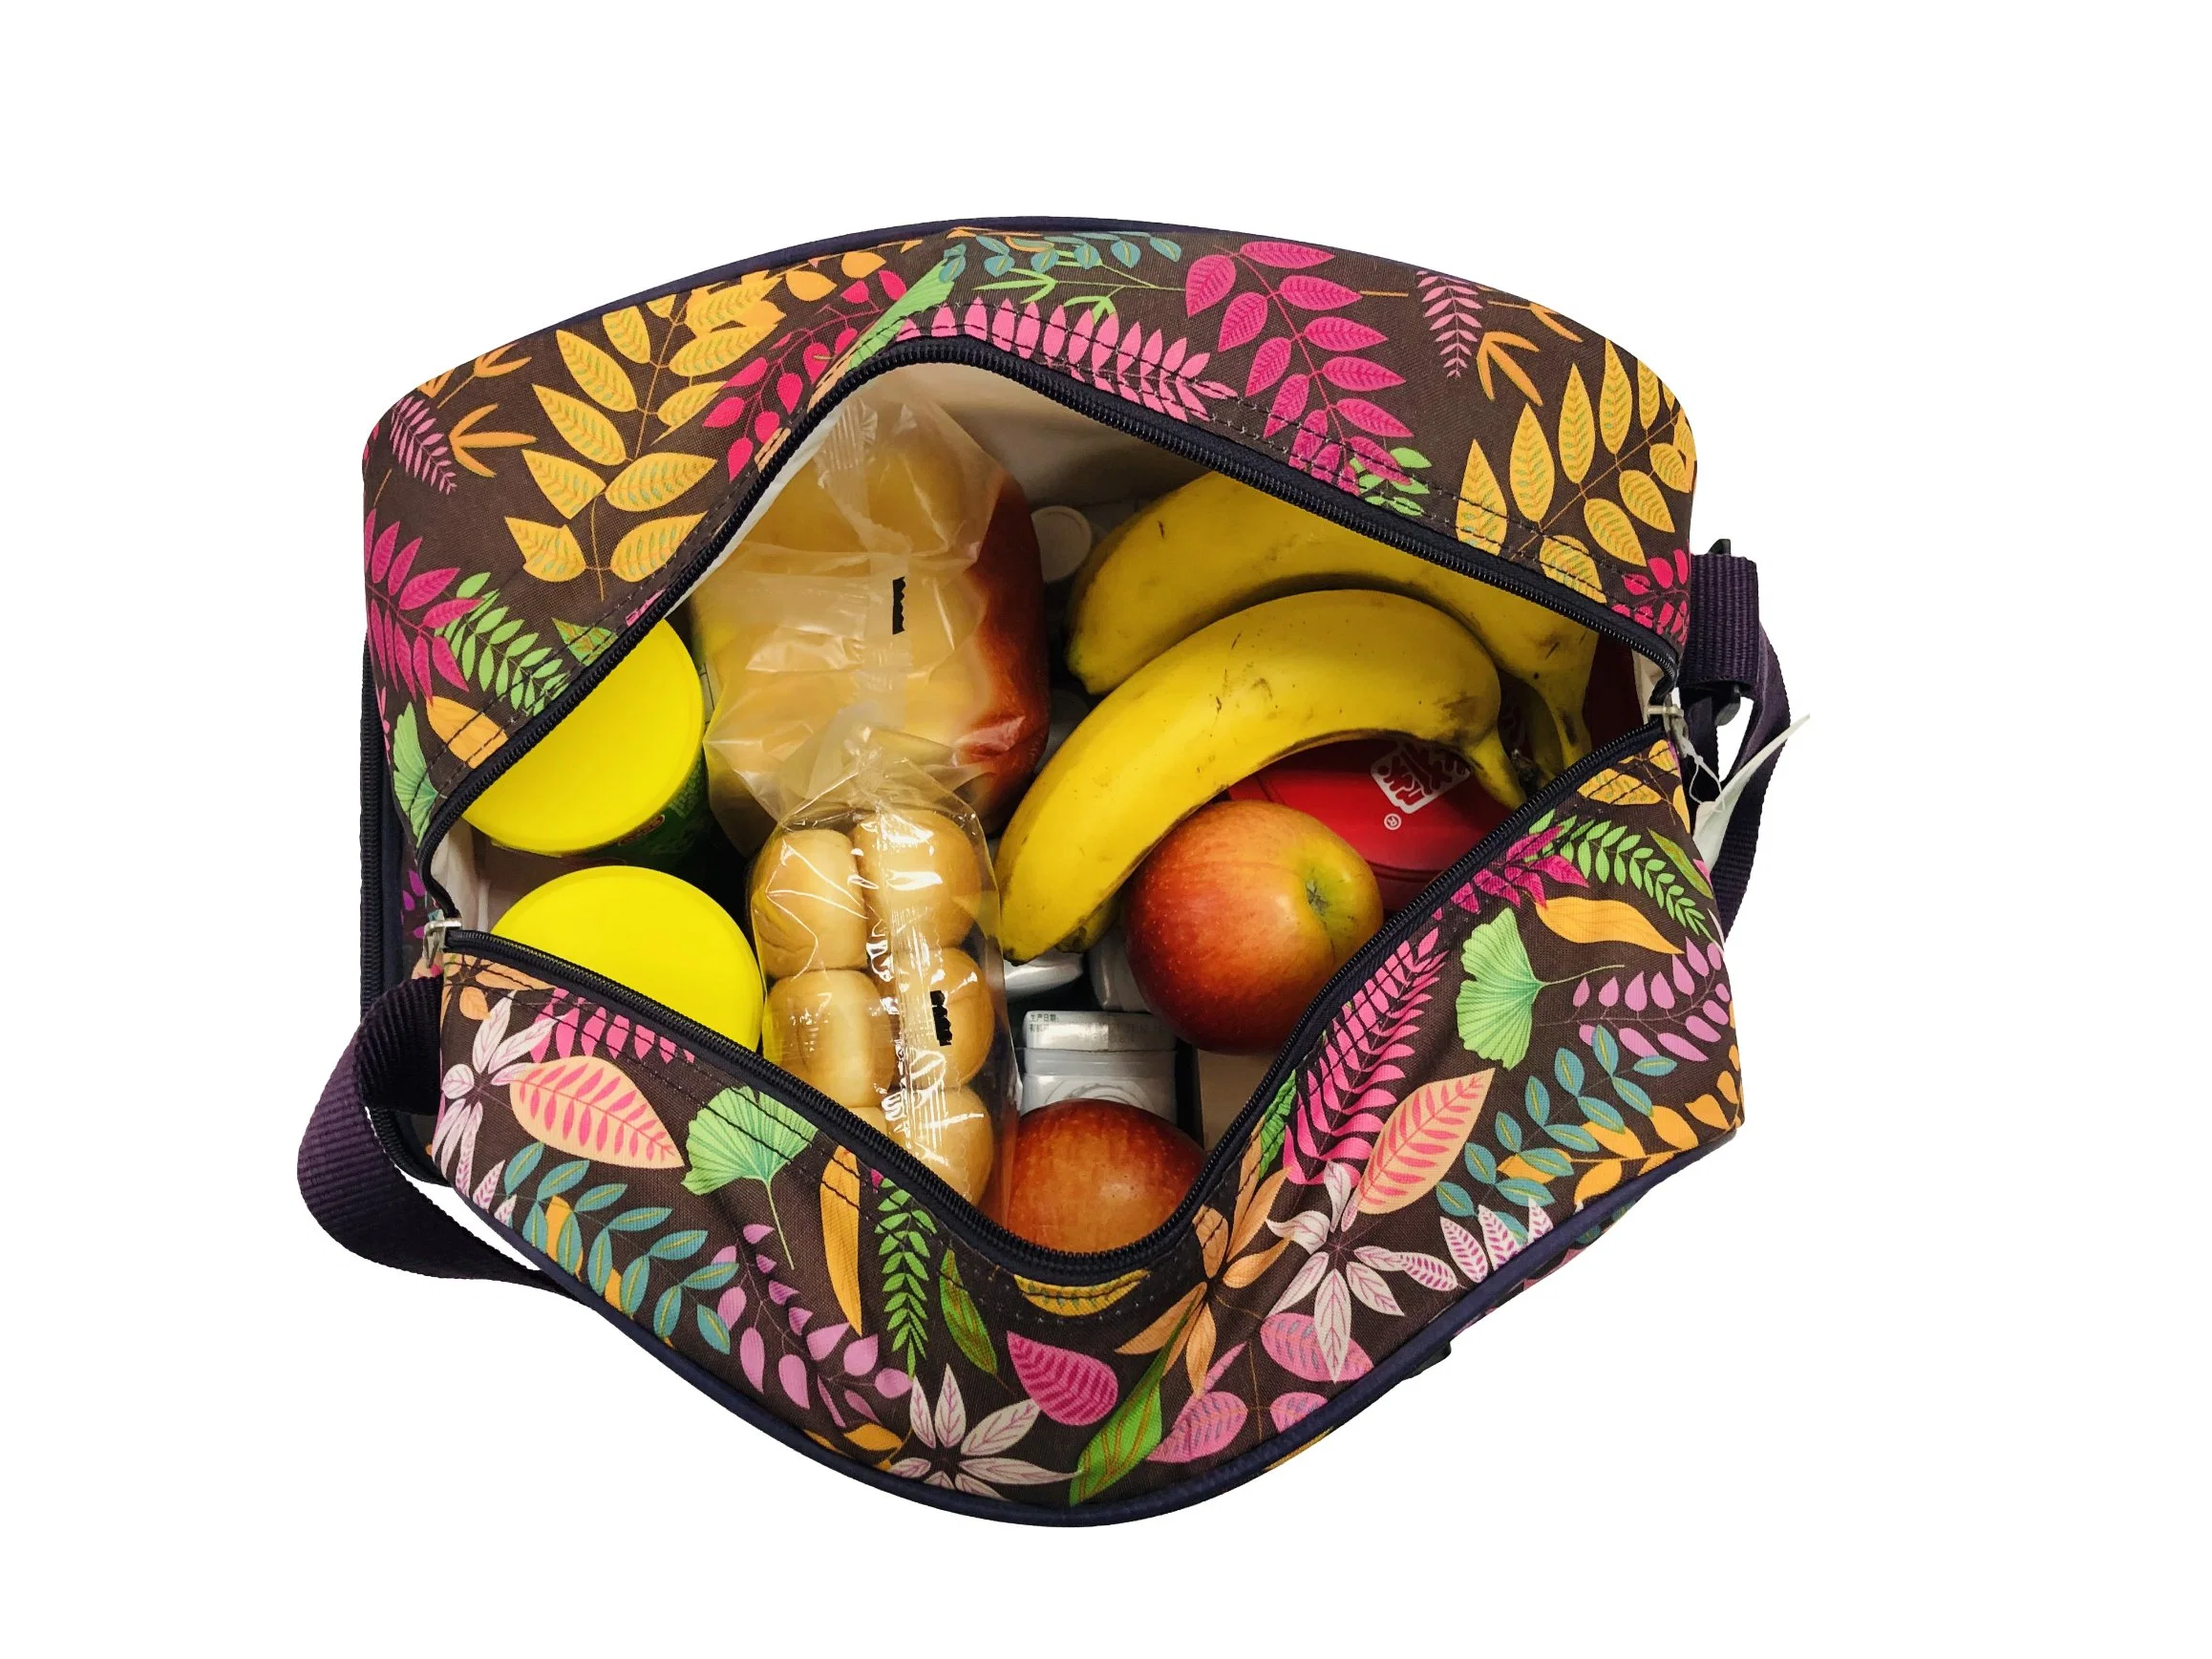 Picnic Portable Cooler Thermal Insulated Delivery Bags High-Capacity Lunch Tote Shoulder Bag